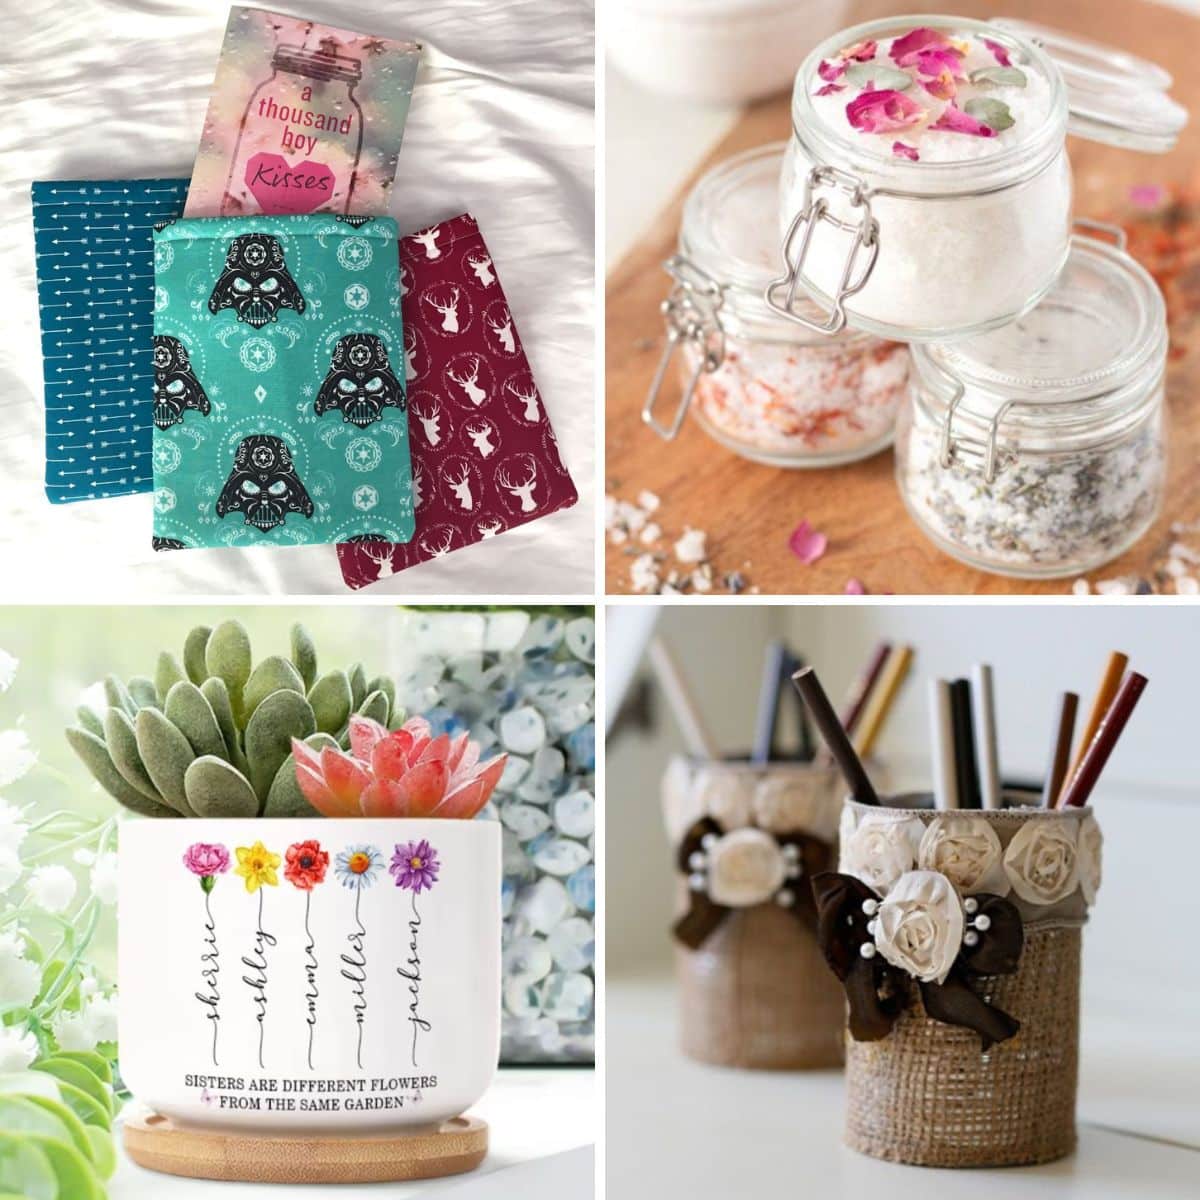 Amazon Prime | Last Minute Mother's Day Gifts - The Sister Studio